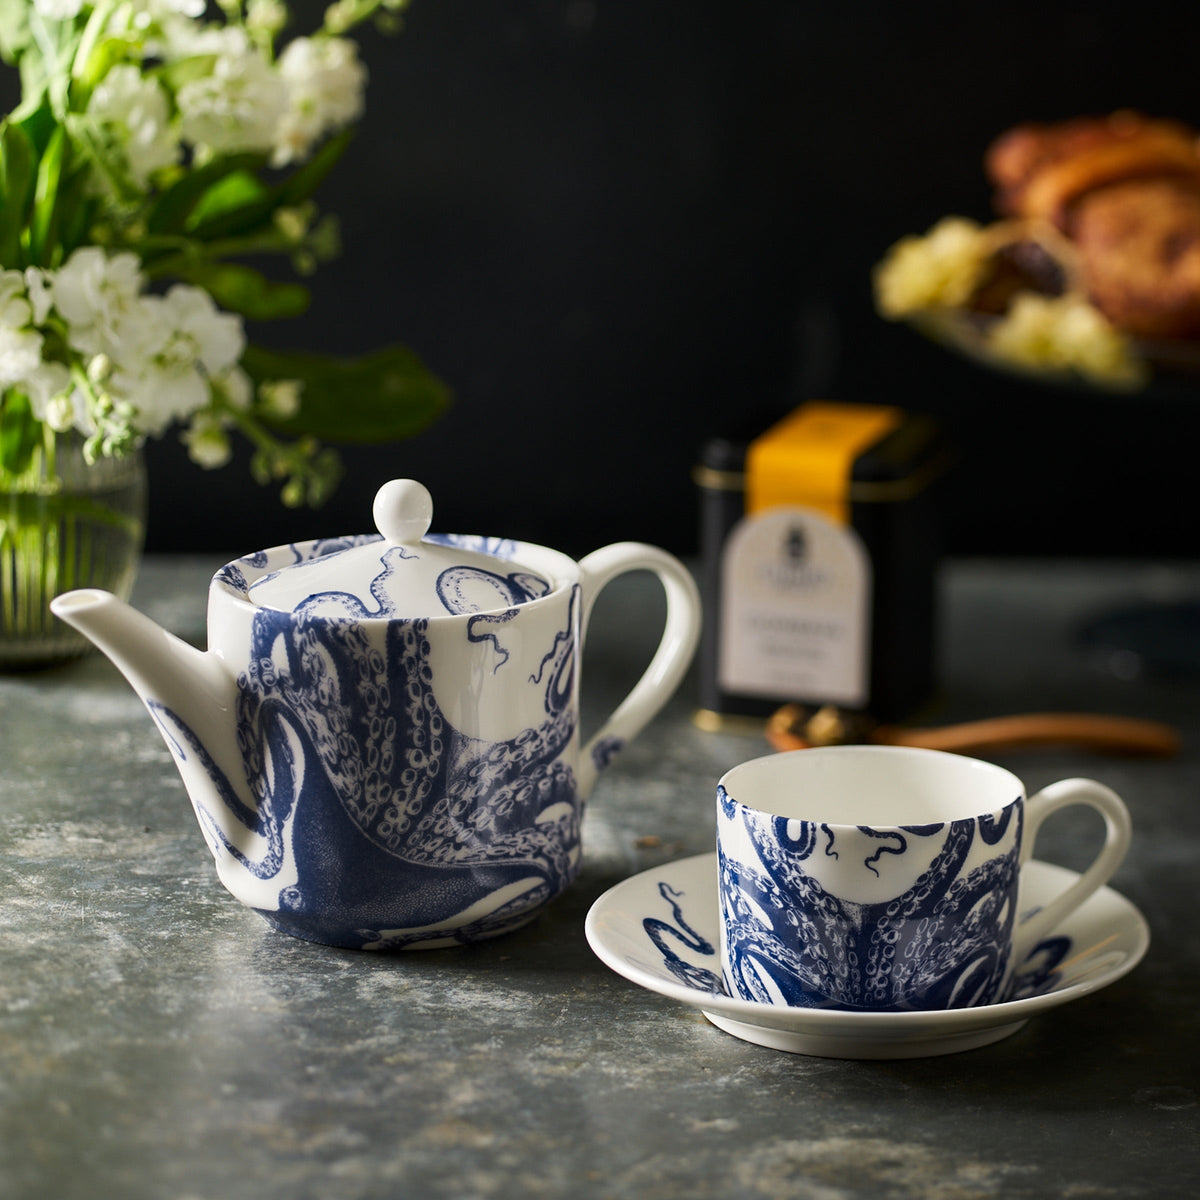 A bone china white teapot and Lucy Cups &amp; Saucers, Set of 2 by Caskata with blue designs sit gracefully on a gray table. In the background, a vase with flowers, a tin of tea, and a plate of pastries complete the charming scene.